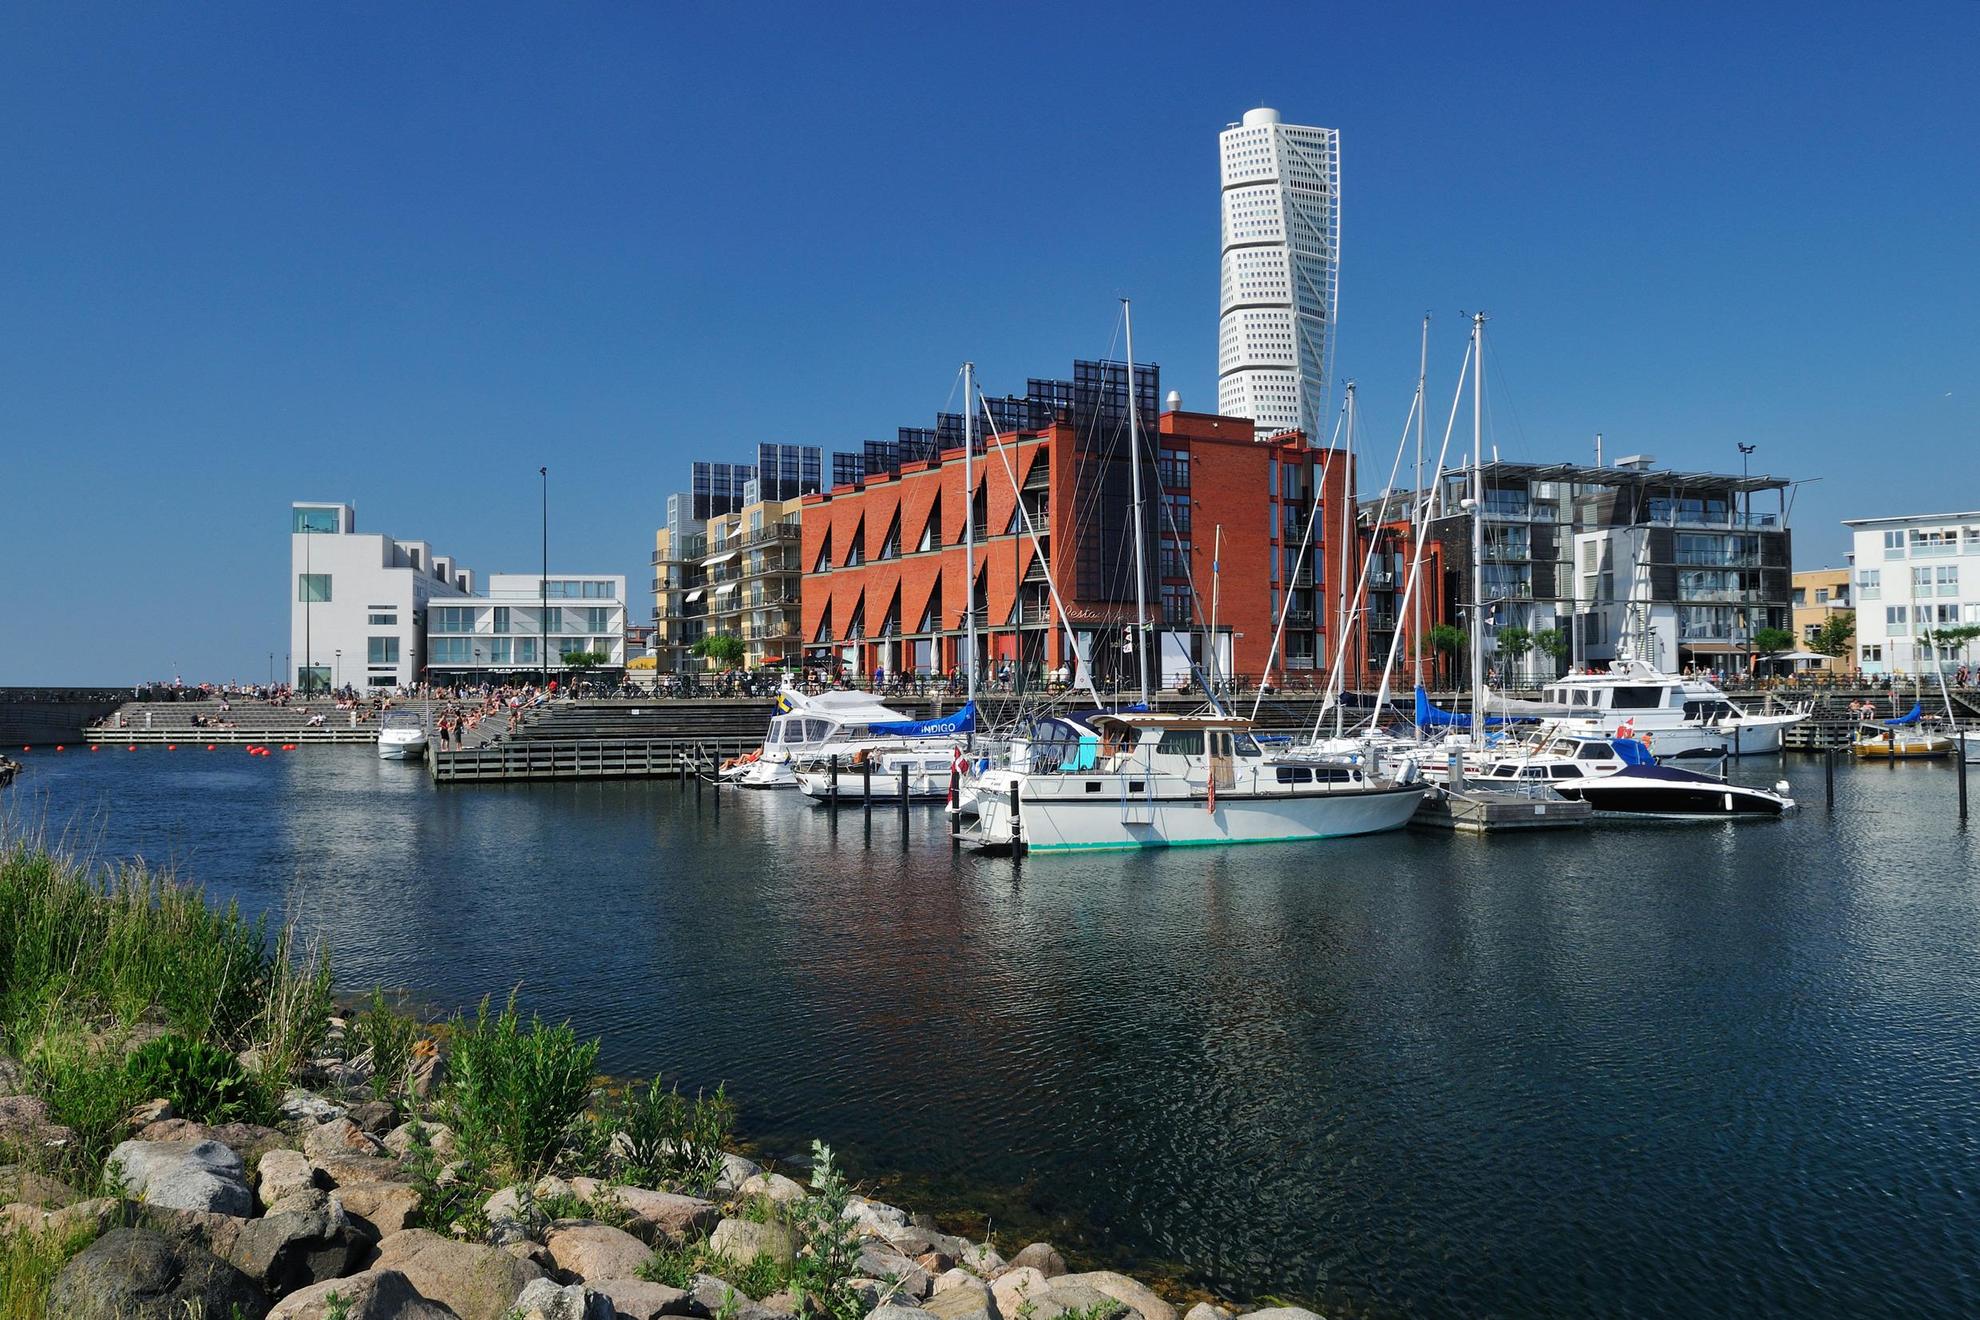 Private boats are moored next to apartment buildings in Malmö's Western Harbour district with the Turning Torso high-rise in the background.